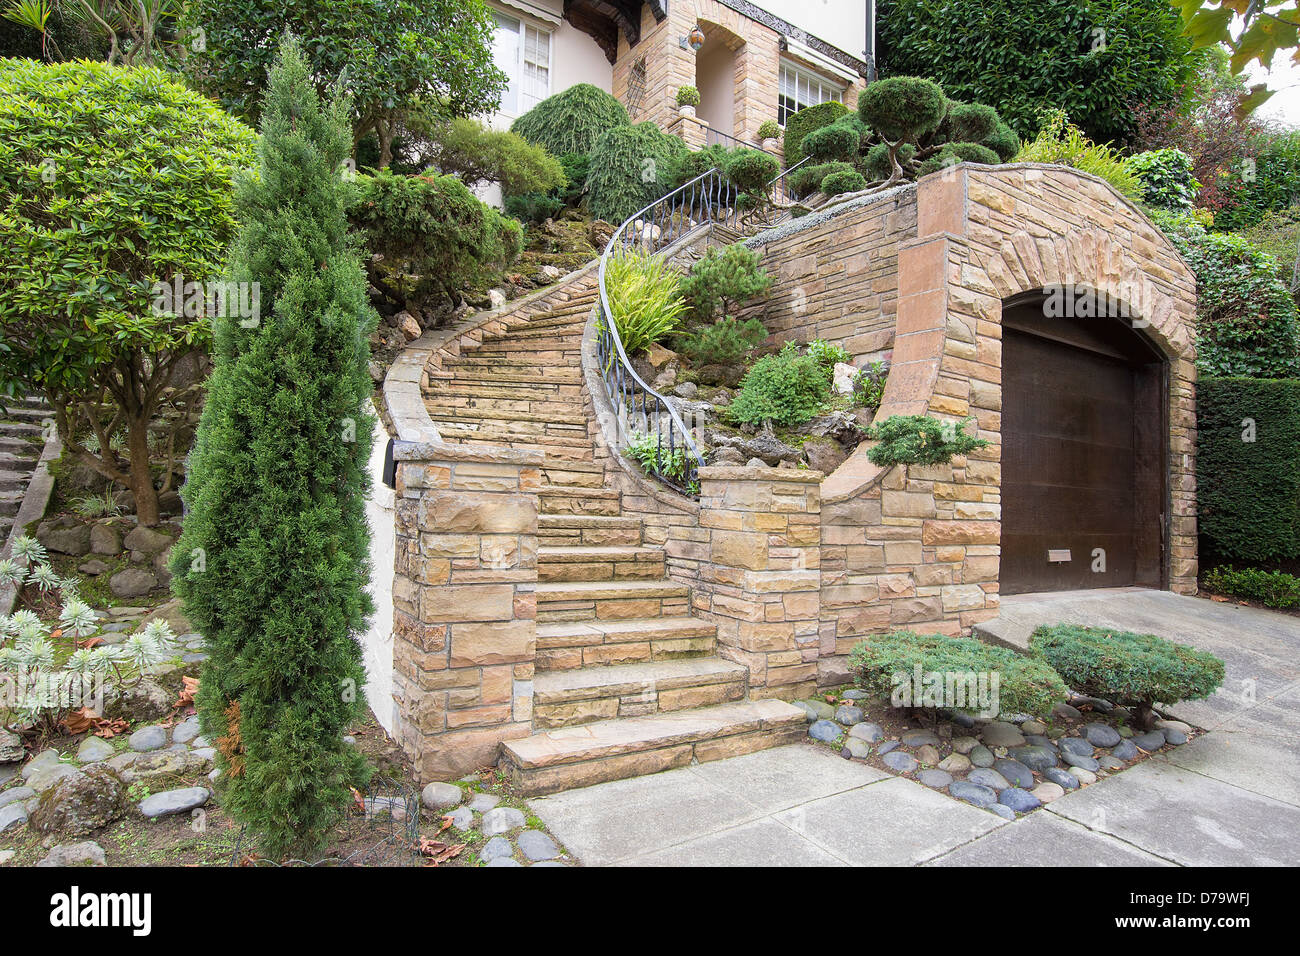 Stone Veneer Faccade on Home Exterior with Manicured Front Entrance Yard Landscape Stock Photo